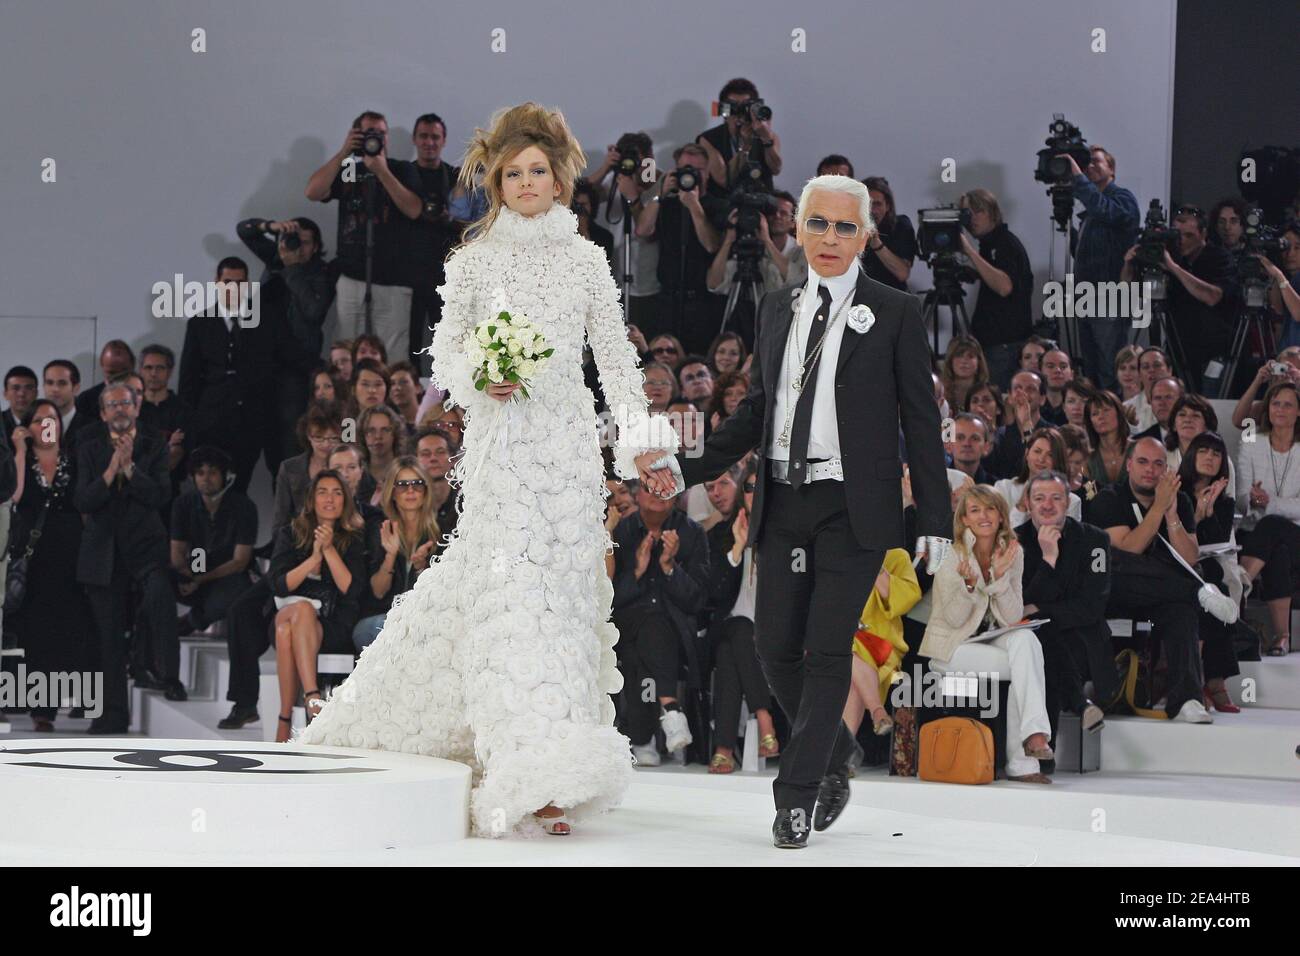 German fashion designer Karl Lagerfeld on the catwalk after Chanel  2005-2006 Fall-Winter Haute-Couture fashion show in Paris, France on July  7, 2005. Photo by JAVA/ABACAPRESS.COM Stock Photo - Alamy